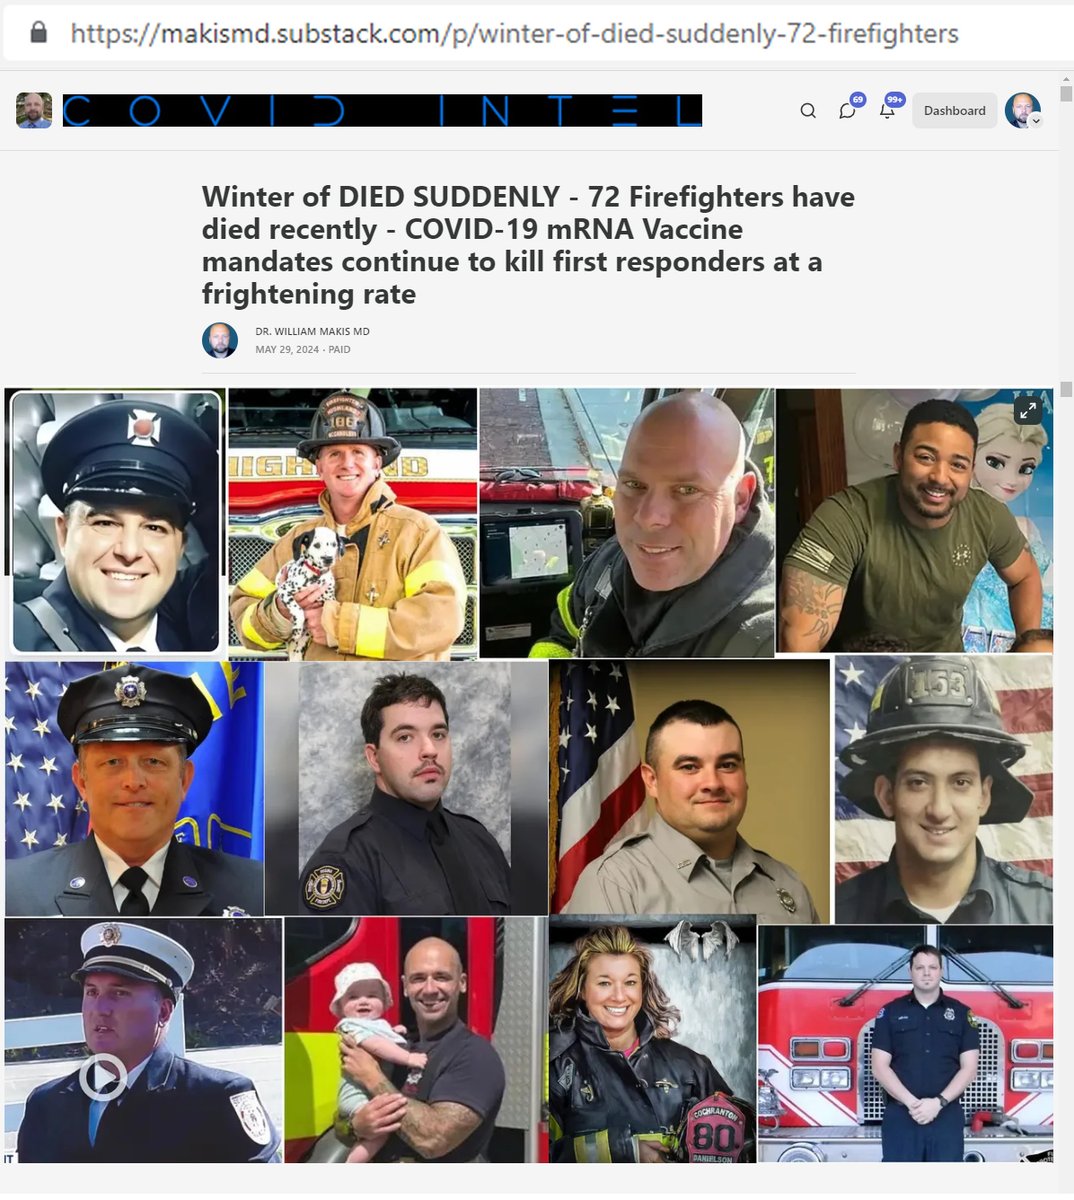 NEW ARTICLE: Winter of DIED SUDDENLY - 72 Firefighters have died recently - COVID-19 mRNA Vaccine mandates continue to kill first responders at a frightening rate

Firefighters are still getting destroyed by the effects of COVID-19 mRNA Vaccine mandates

They are dying suddenly